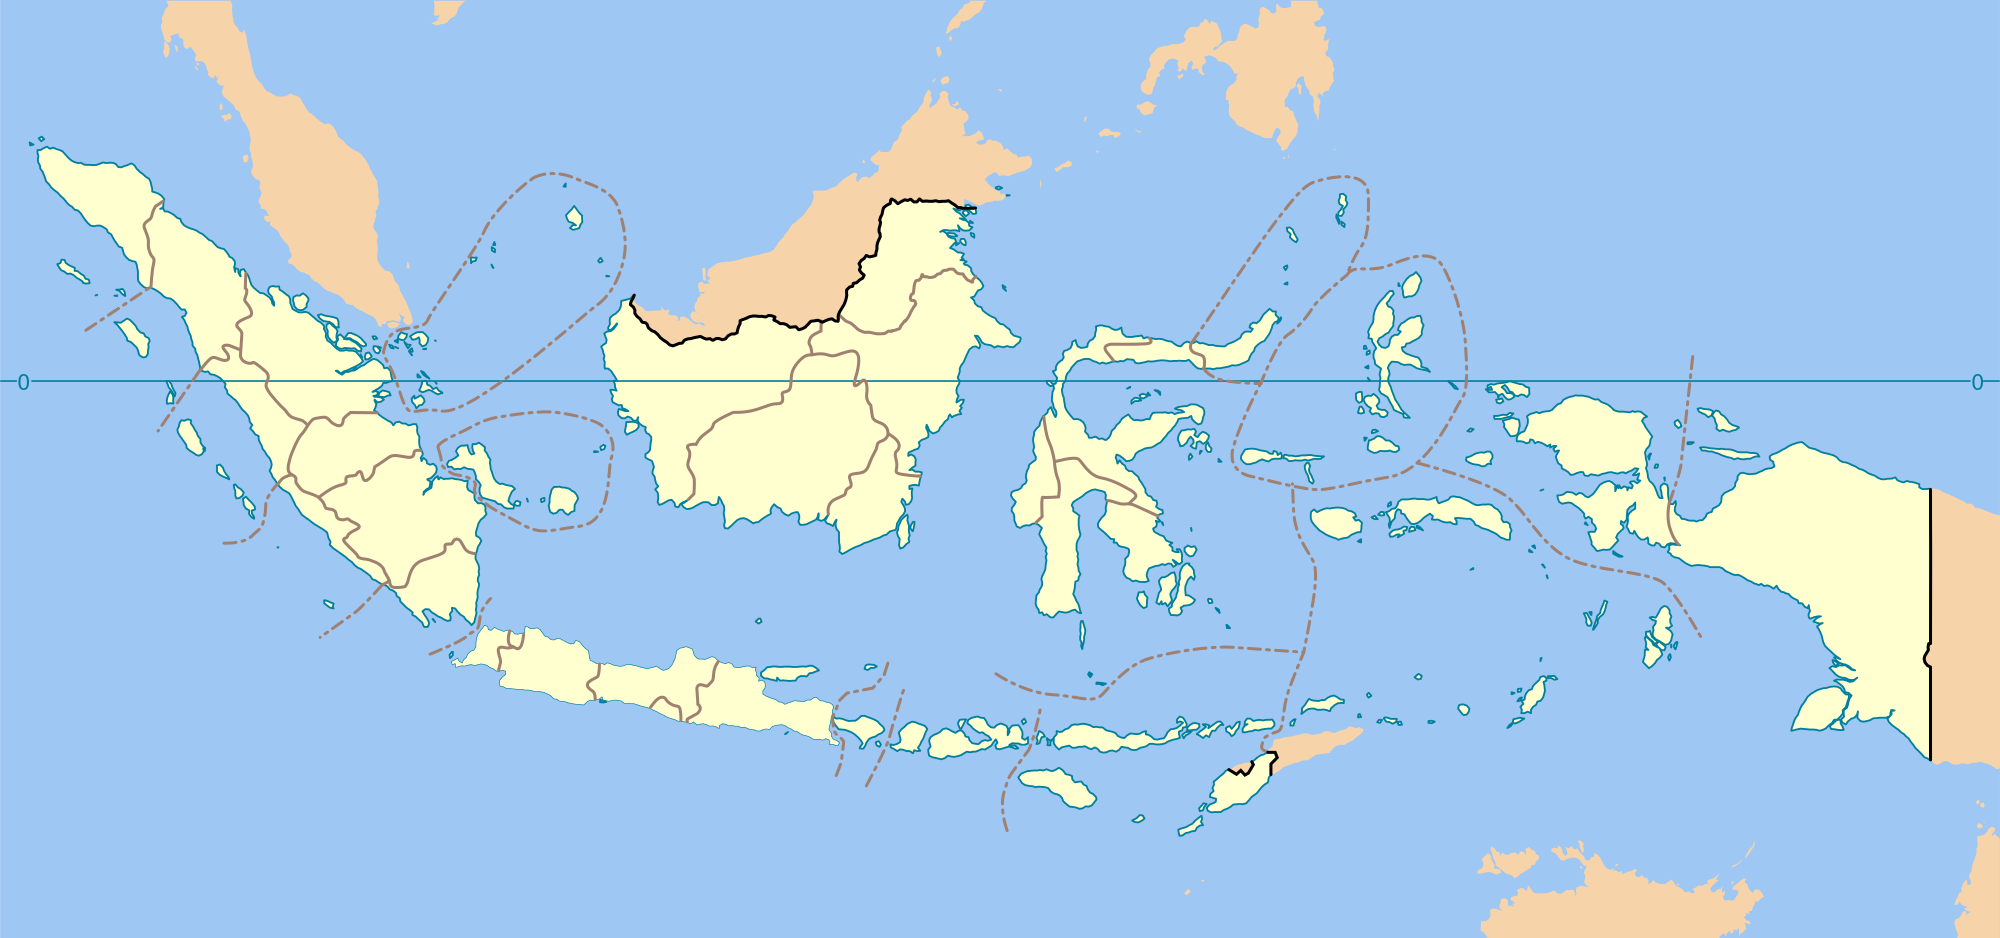 More than 700 languages are spoken in Indonesia.